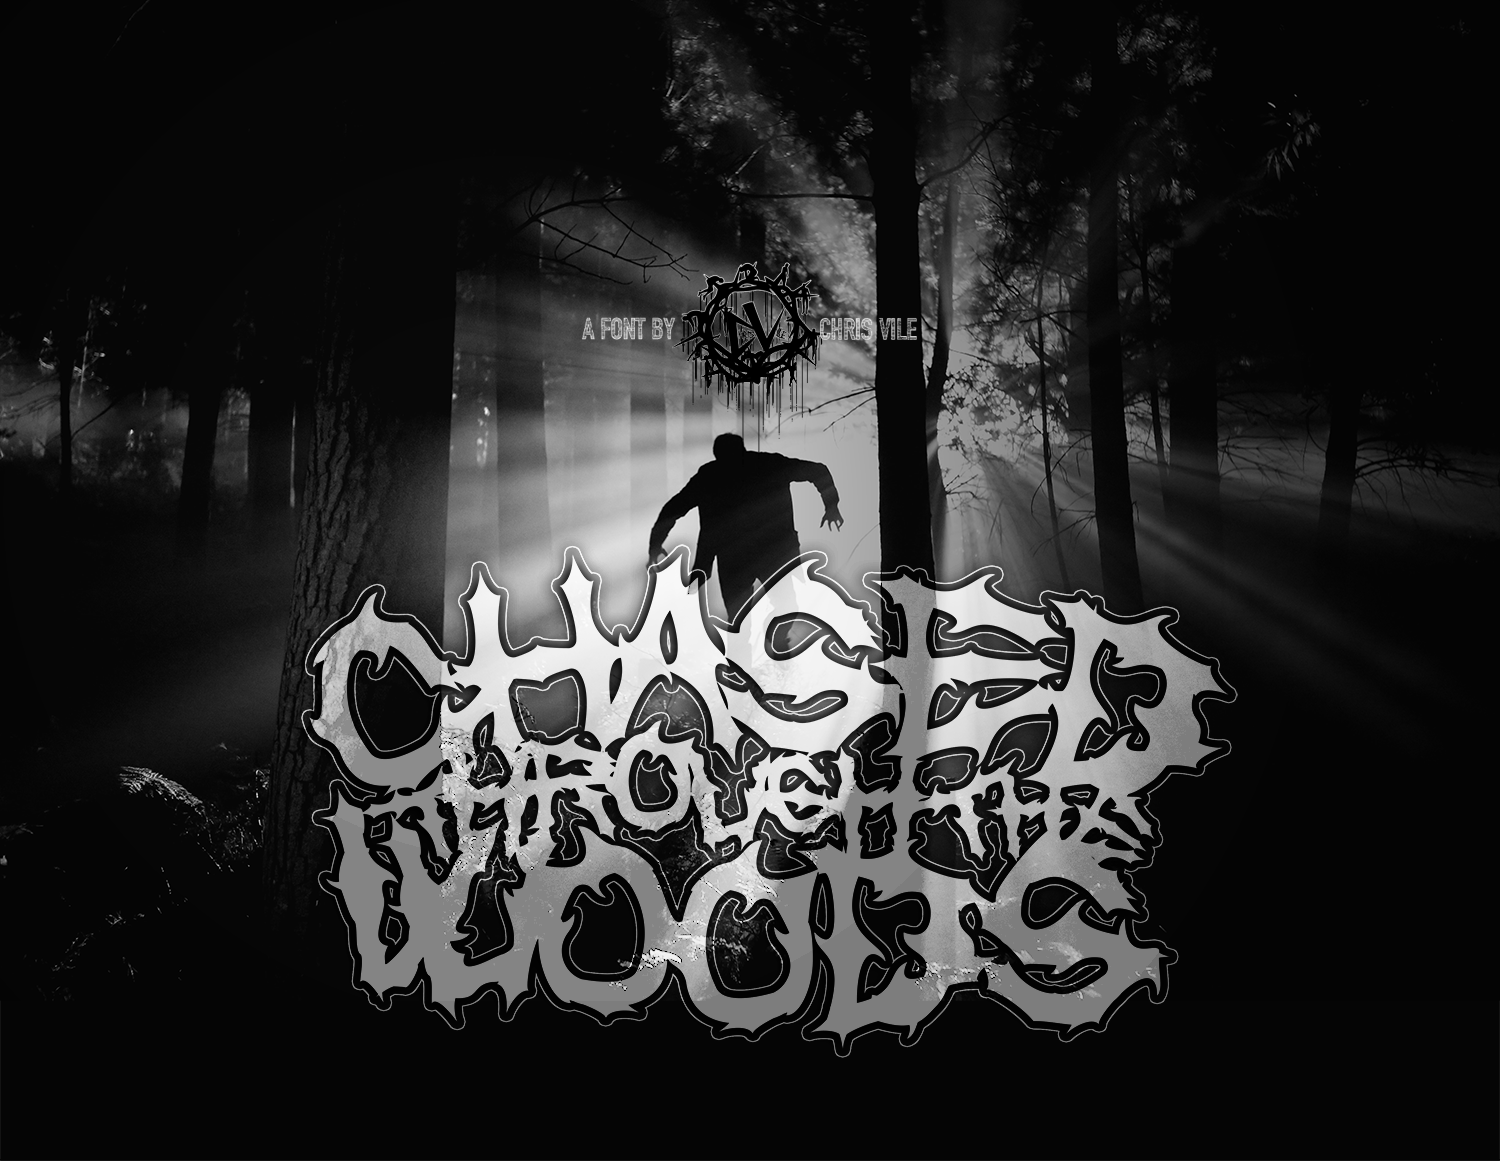 Chased Through The Woods